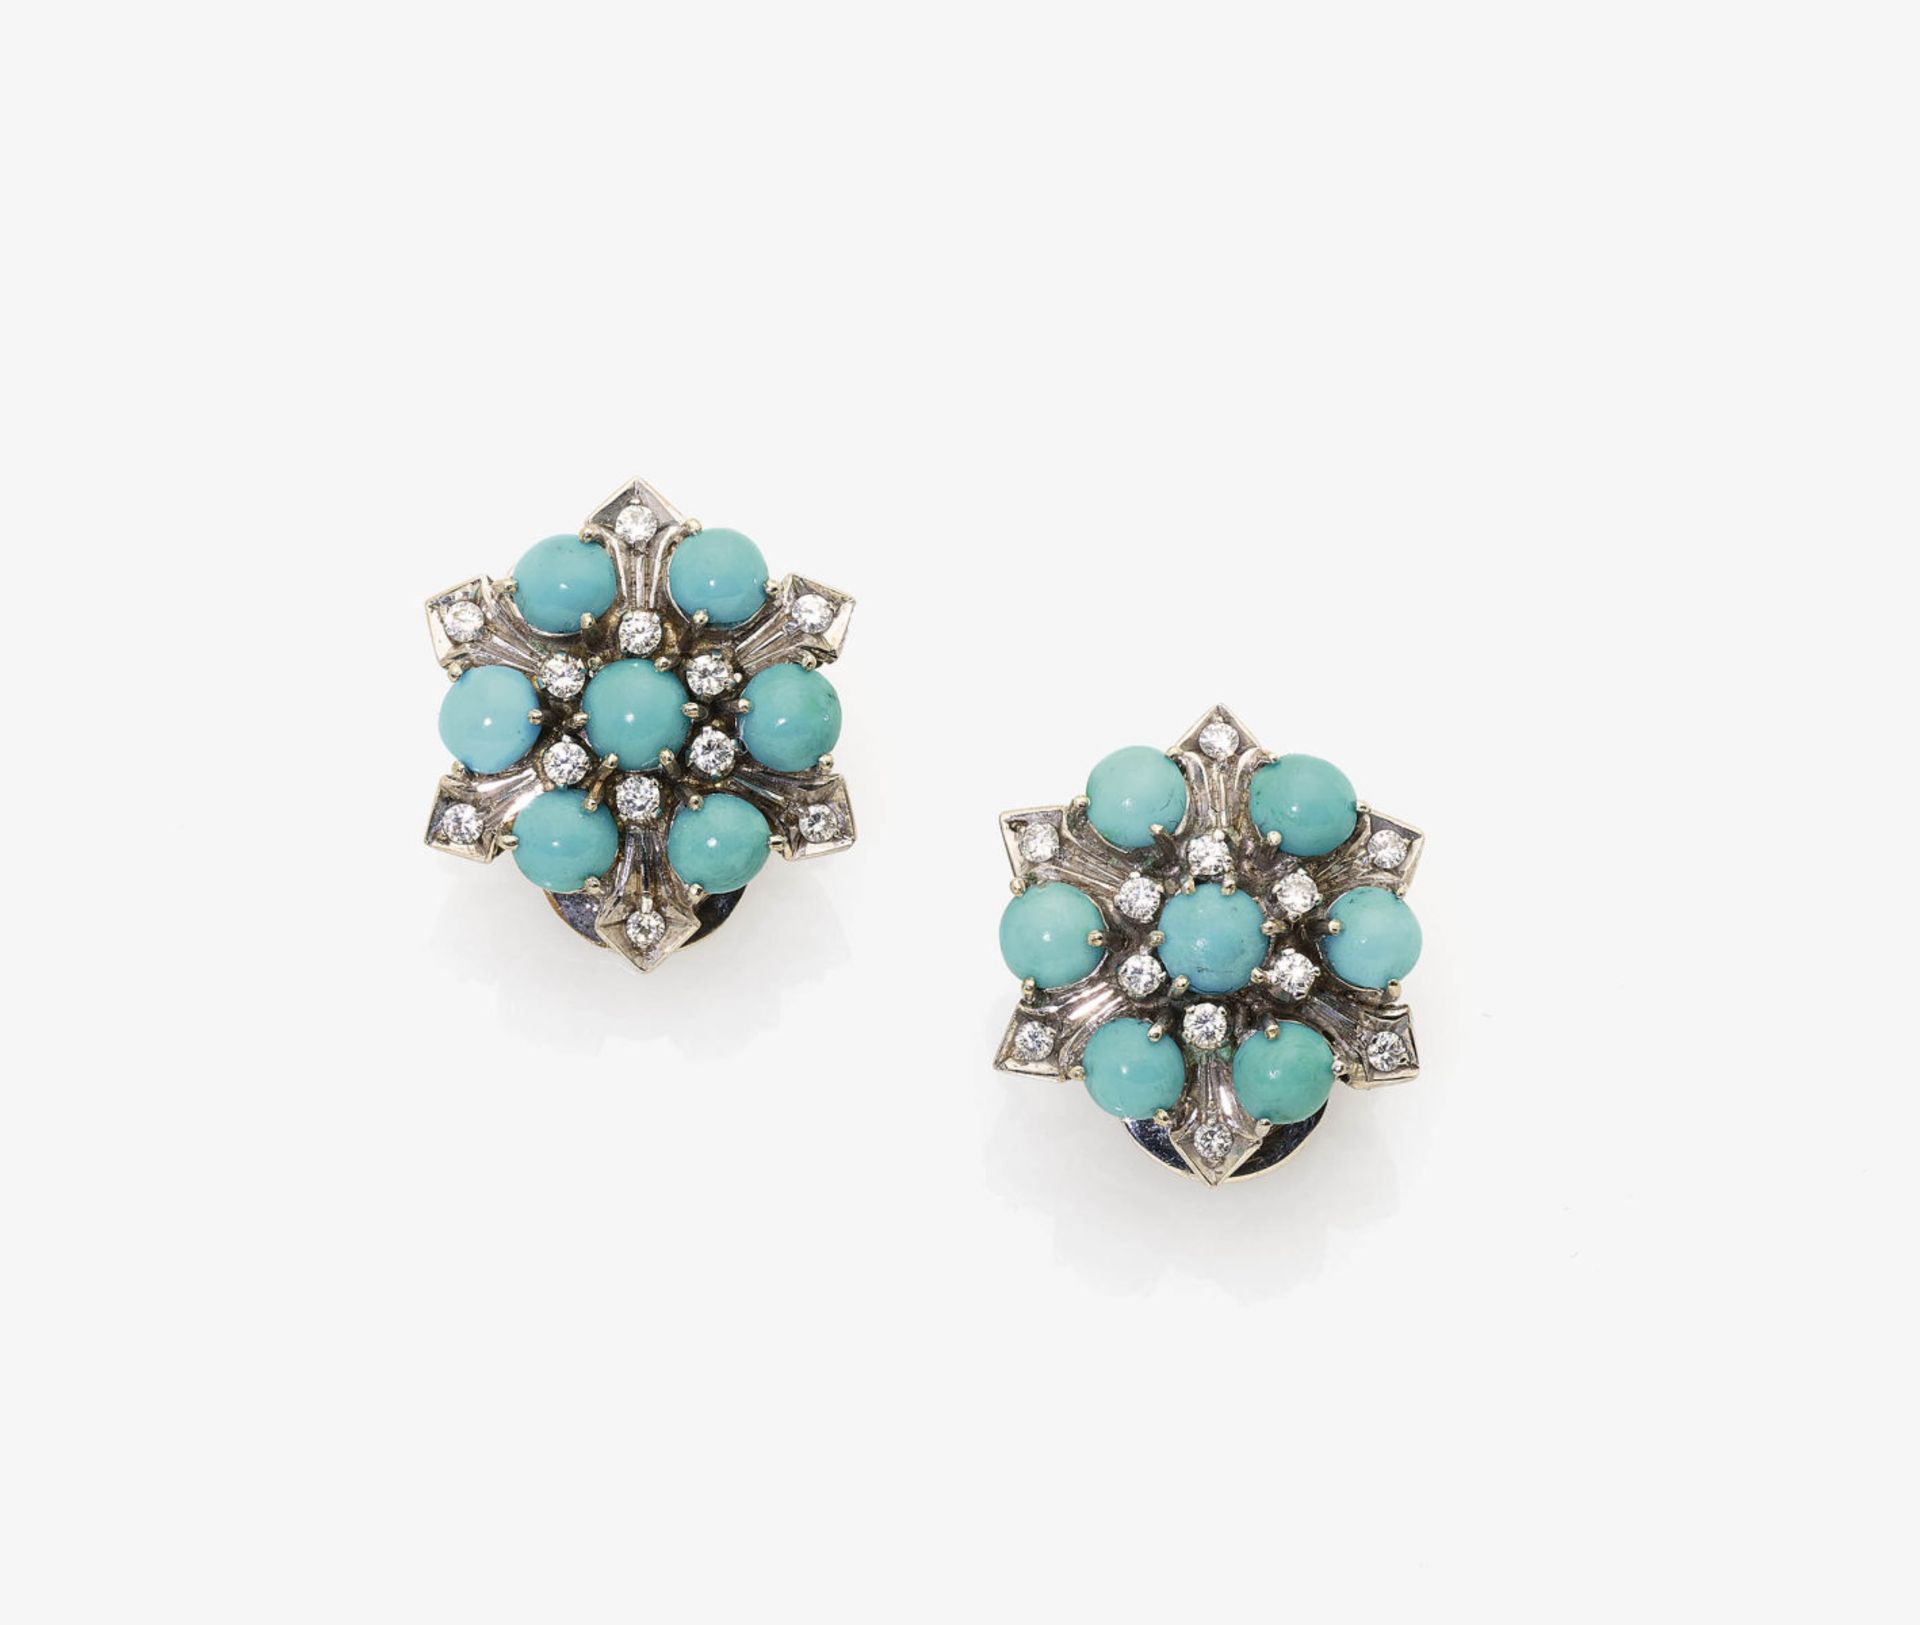 A Pair of Turquoise and Diamond Earrings